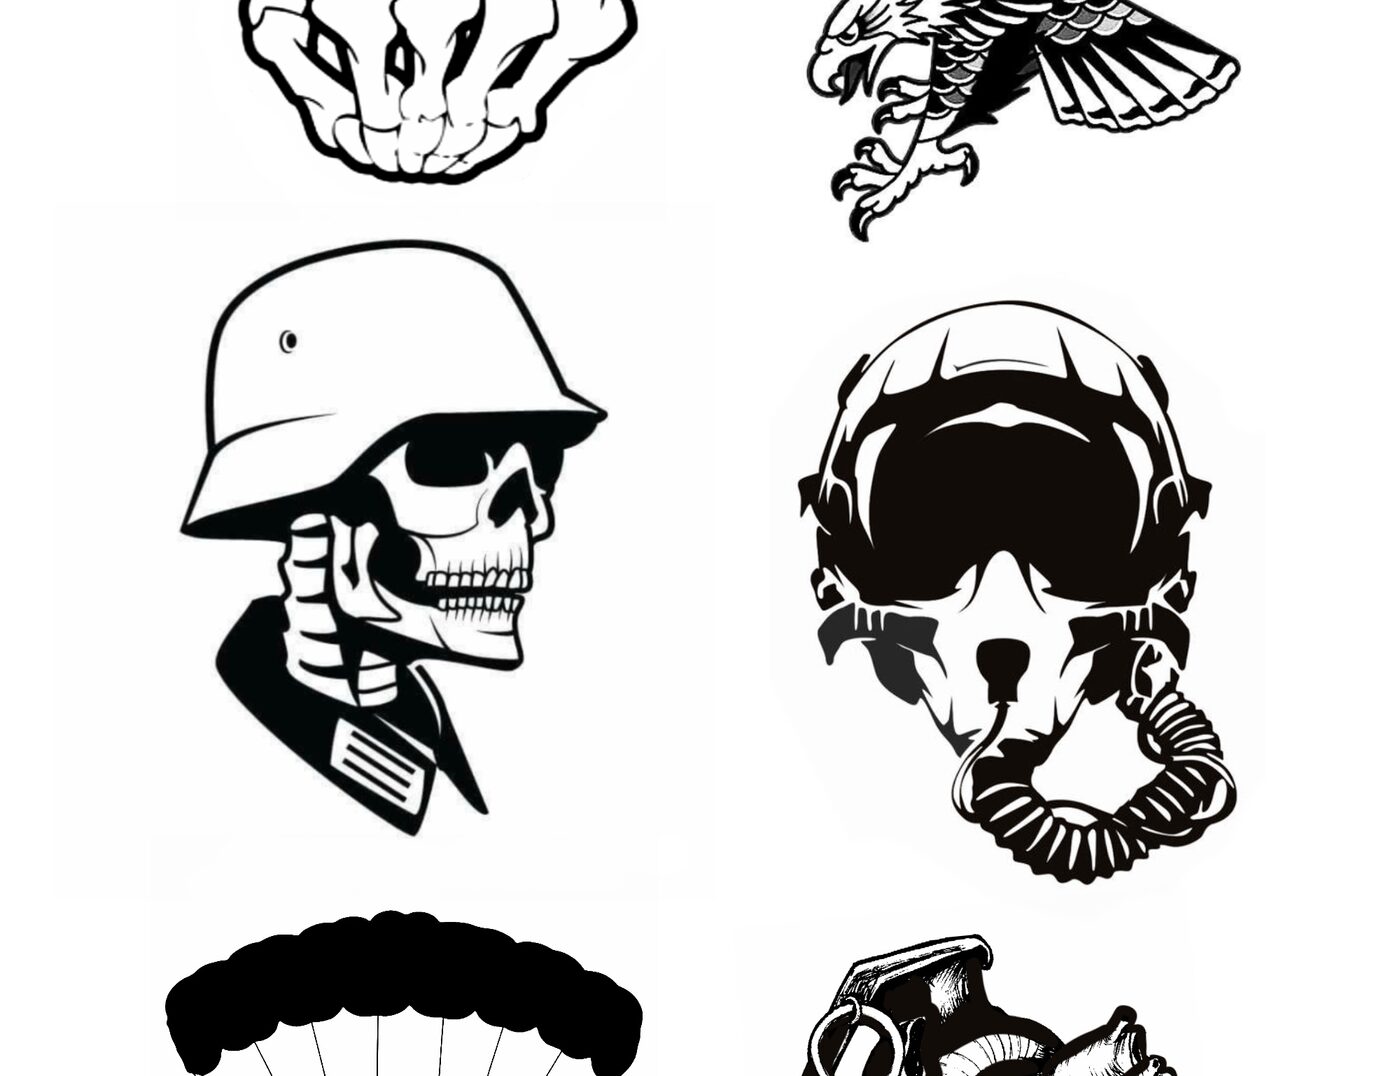 Military Flash Tattoo By Rene Cristobal. Purchase any of these tattoos online or in shop and walk in whenever you are ready to have it inked!